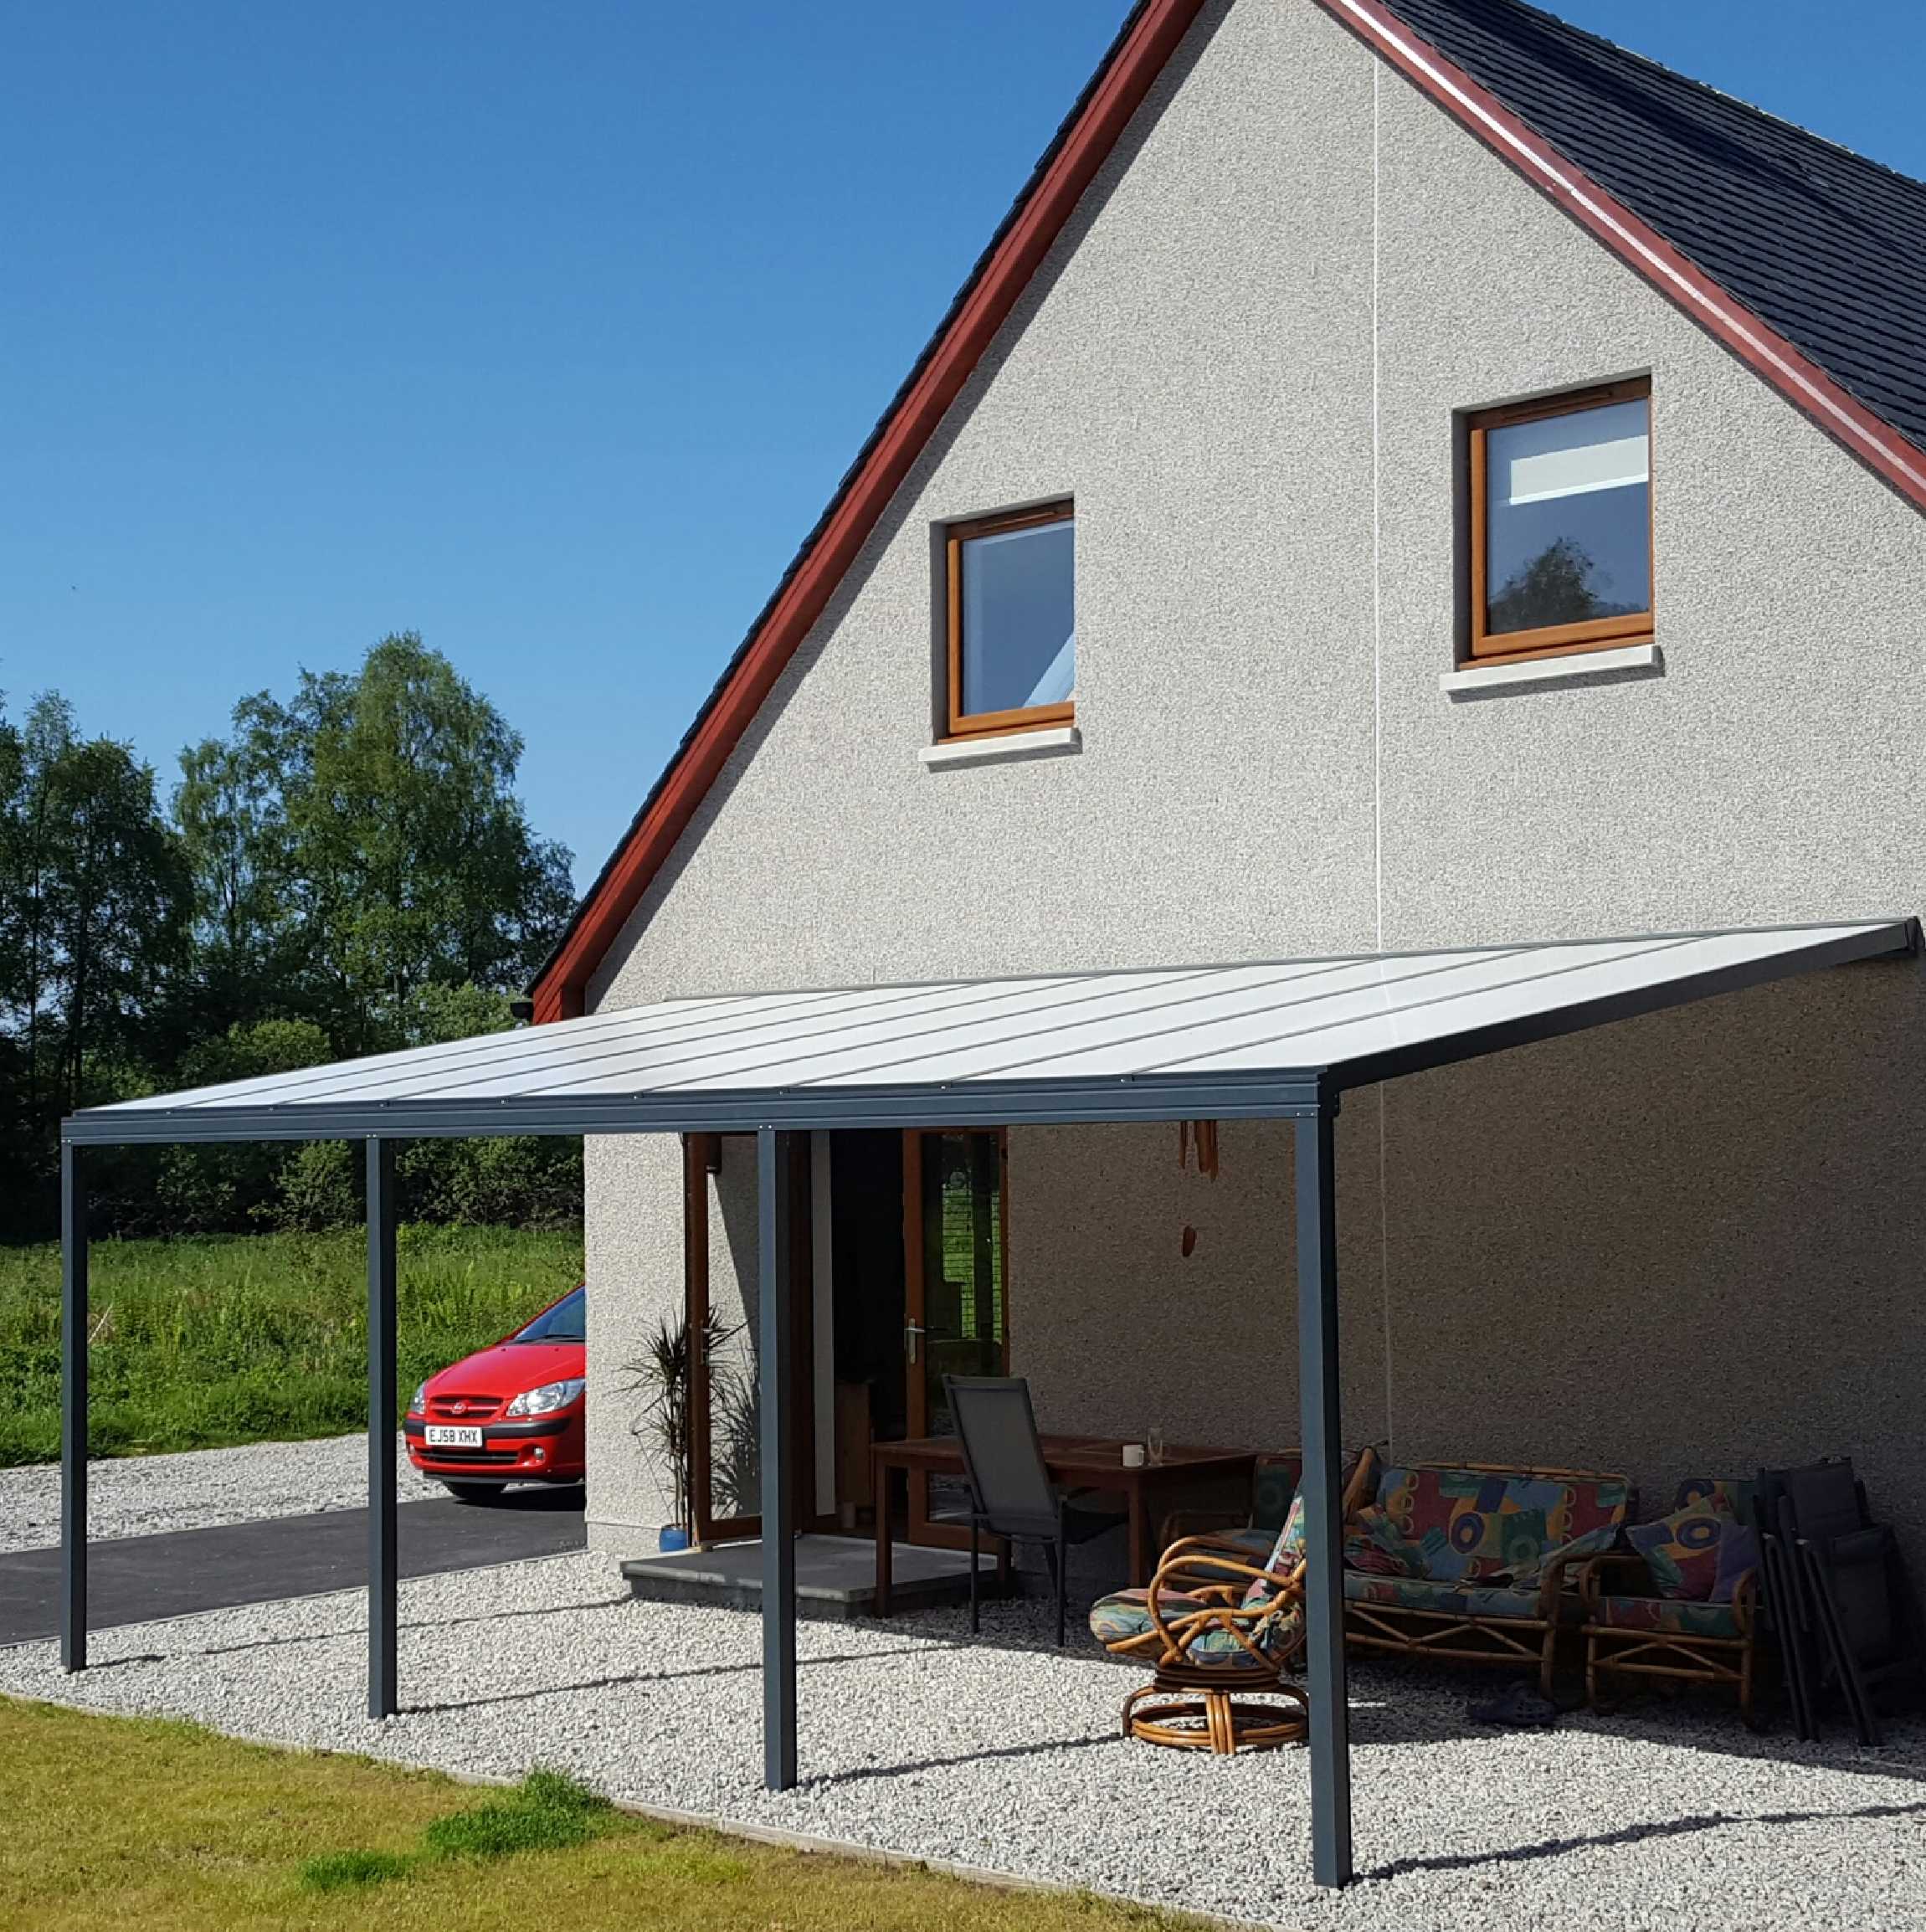 Great selection of SPECIAL OFFER Omega Smart Lean-To Canopy, Anthracite Grey, 16mm Polycarbonate Glazing - 6.0m (W) x 1.5m (P), (3) Supporting Posts